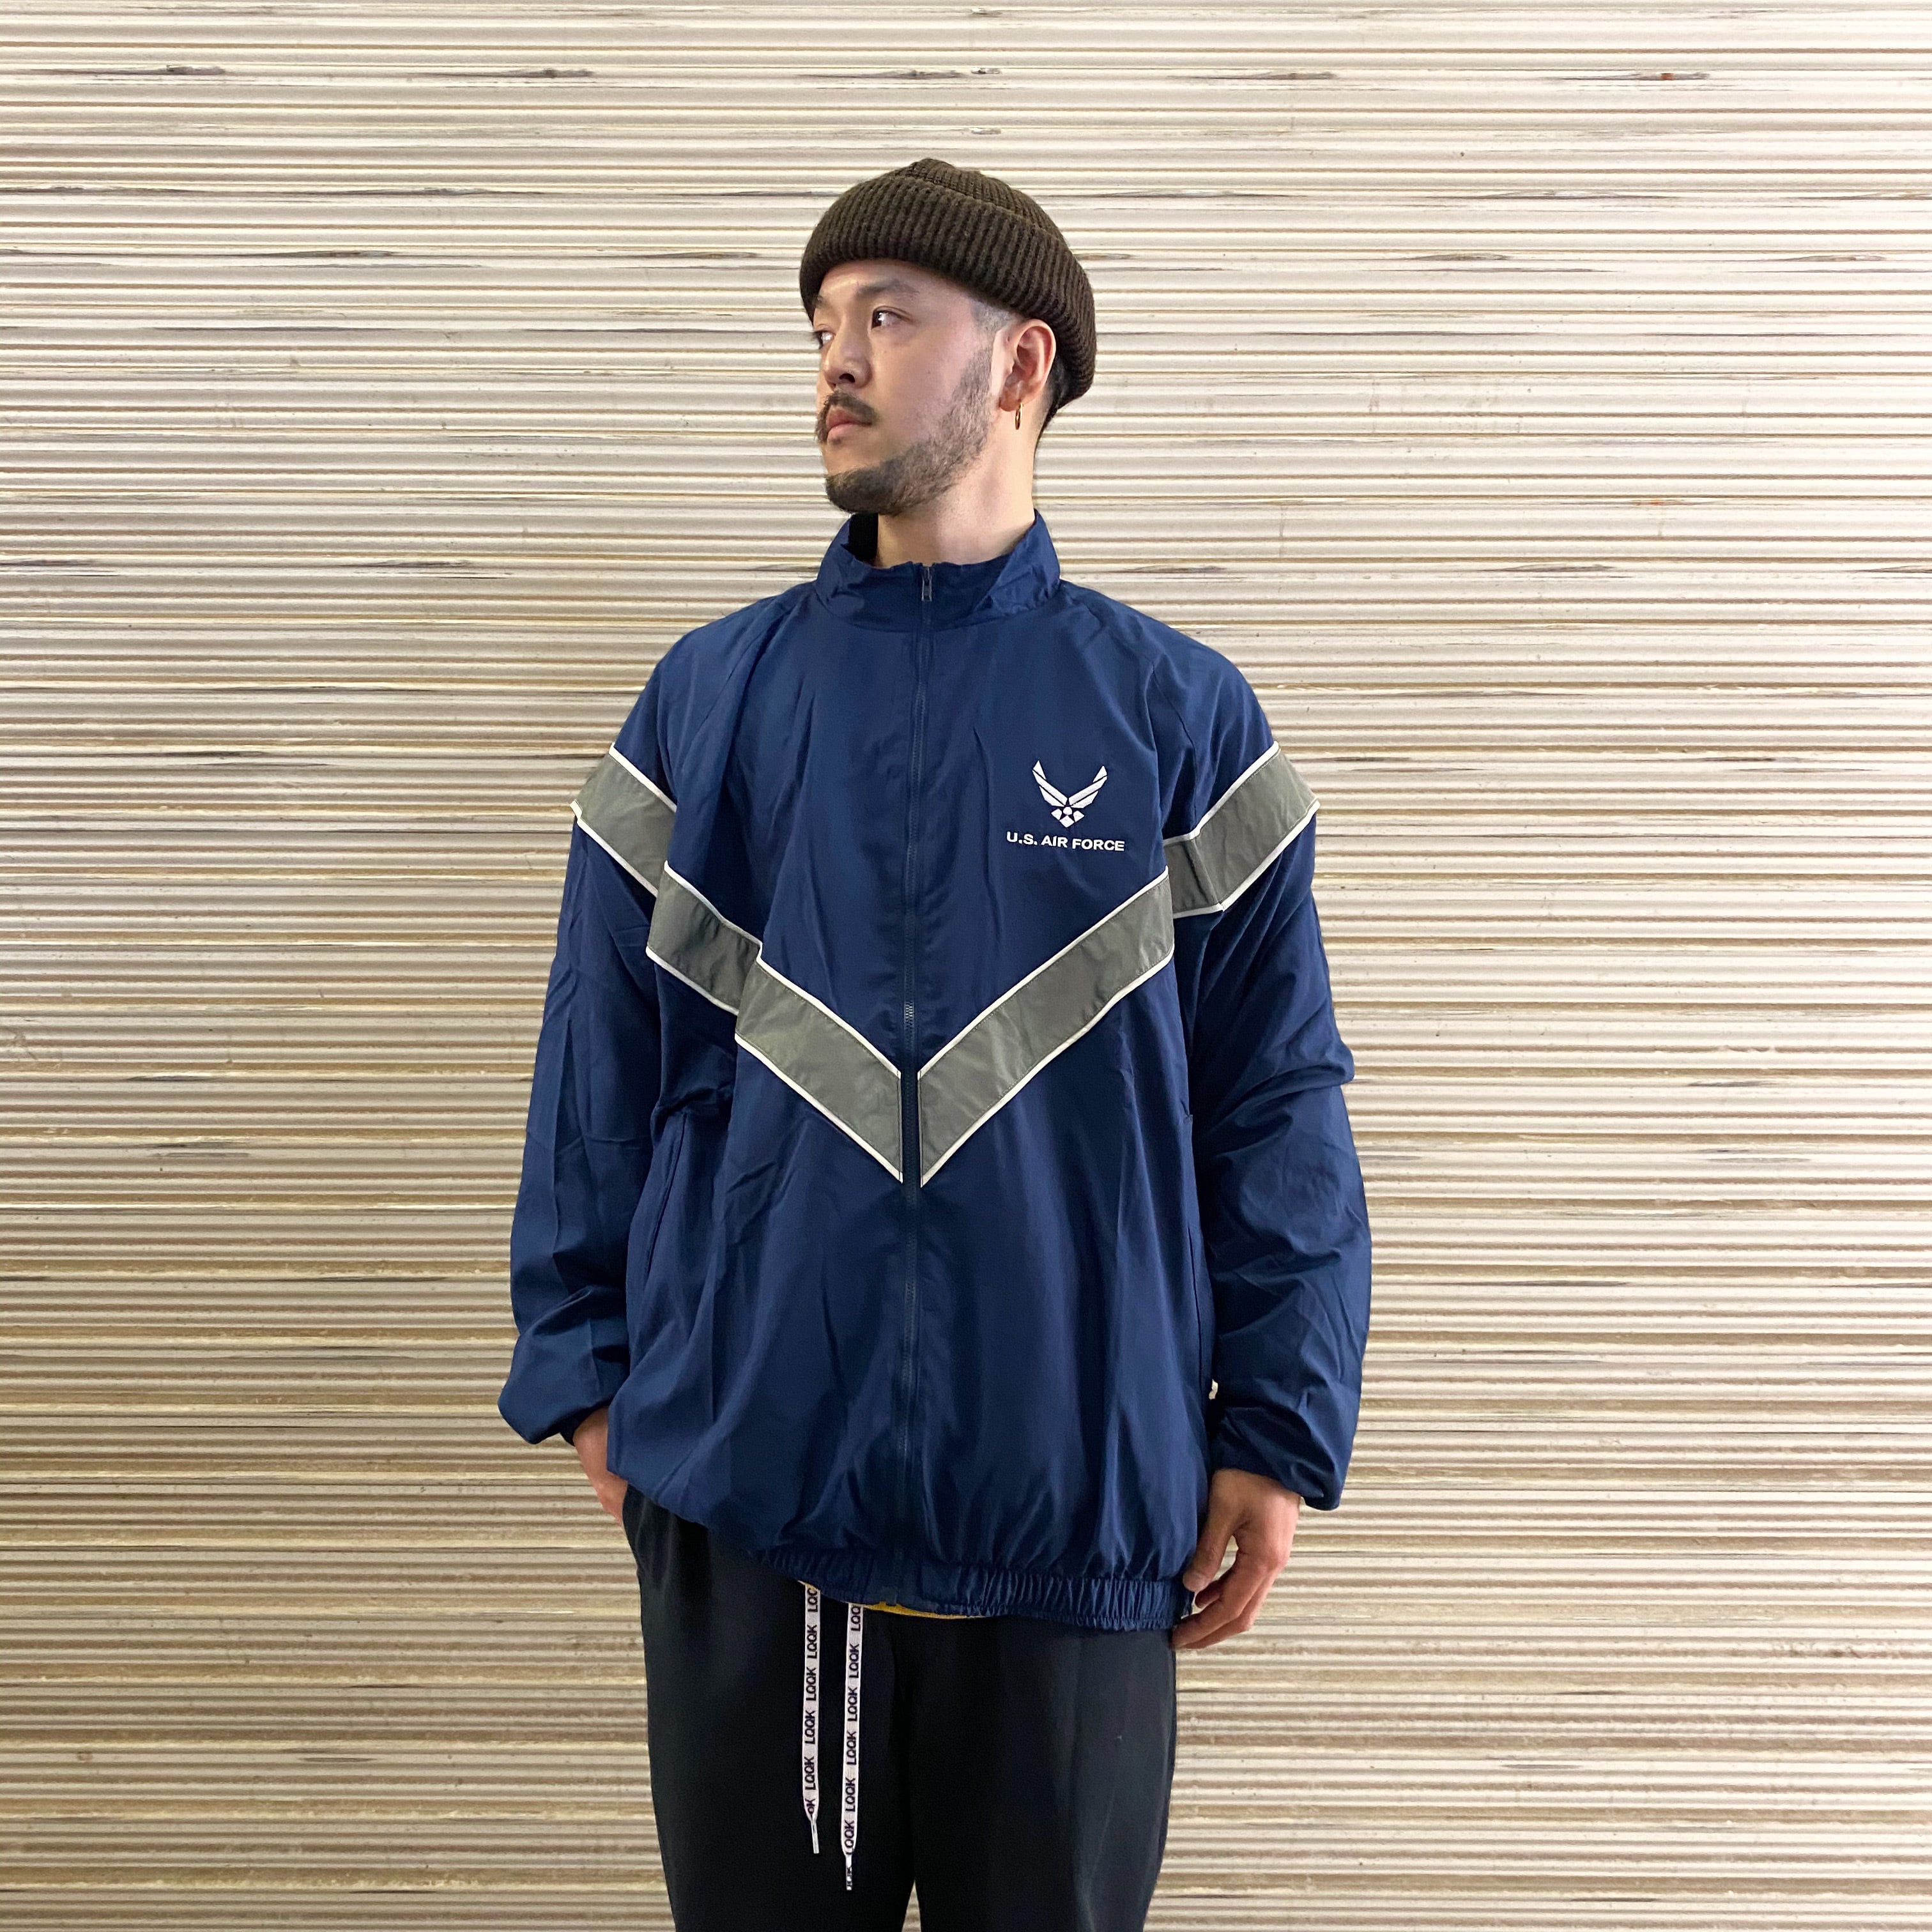 14' U.S. AIR FORCE Physical Traning Jacket 